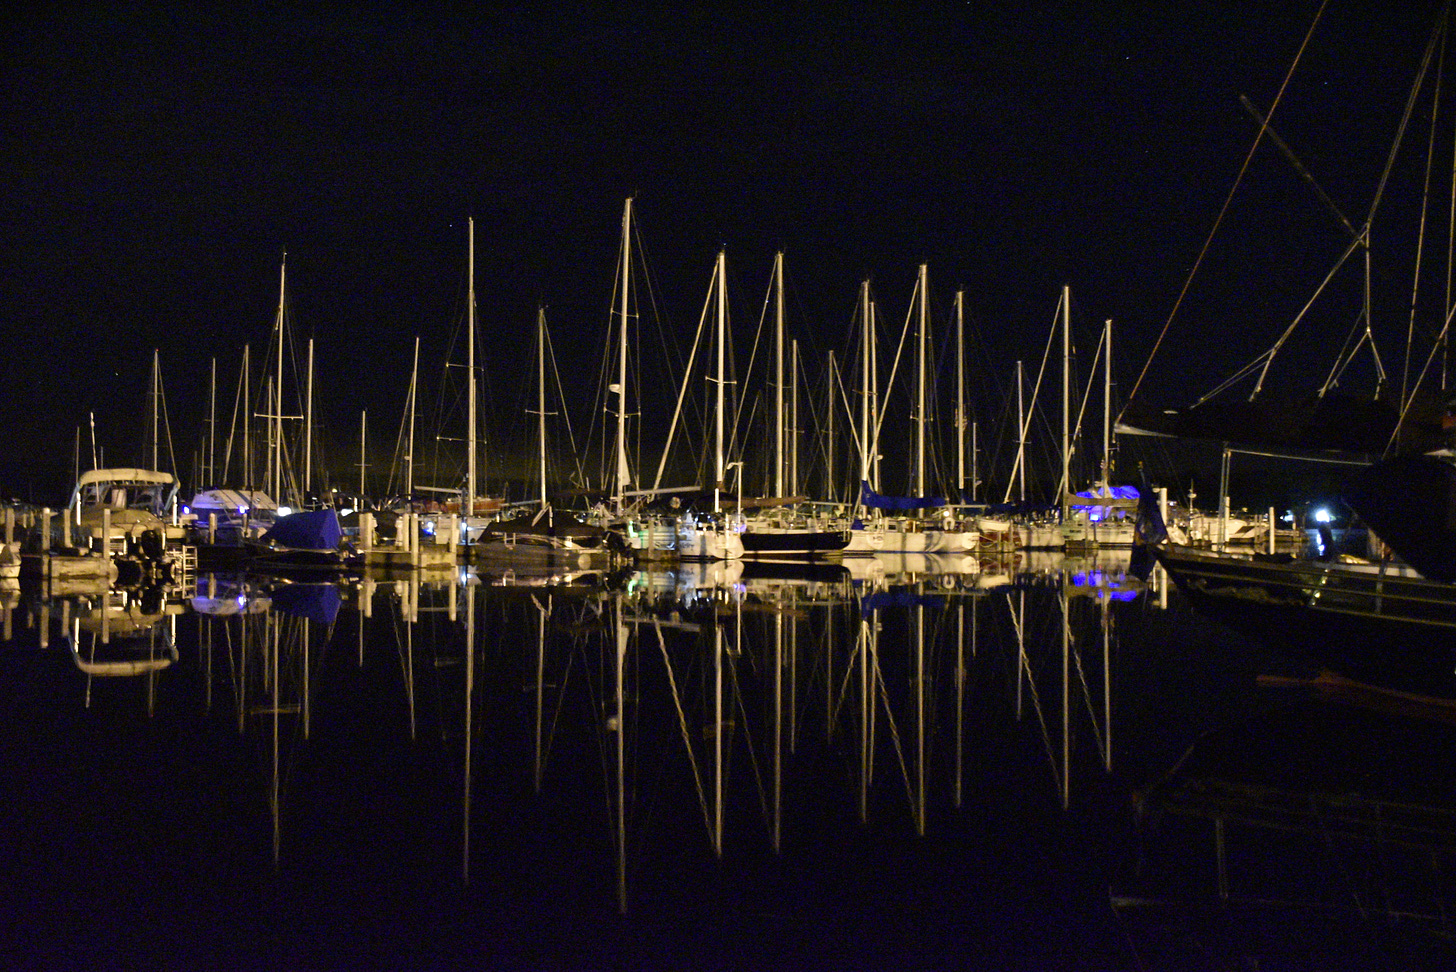 Photo of sailboats a dock at night with light reflecting images off of the water.